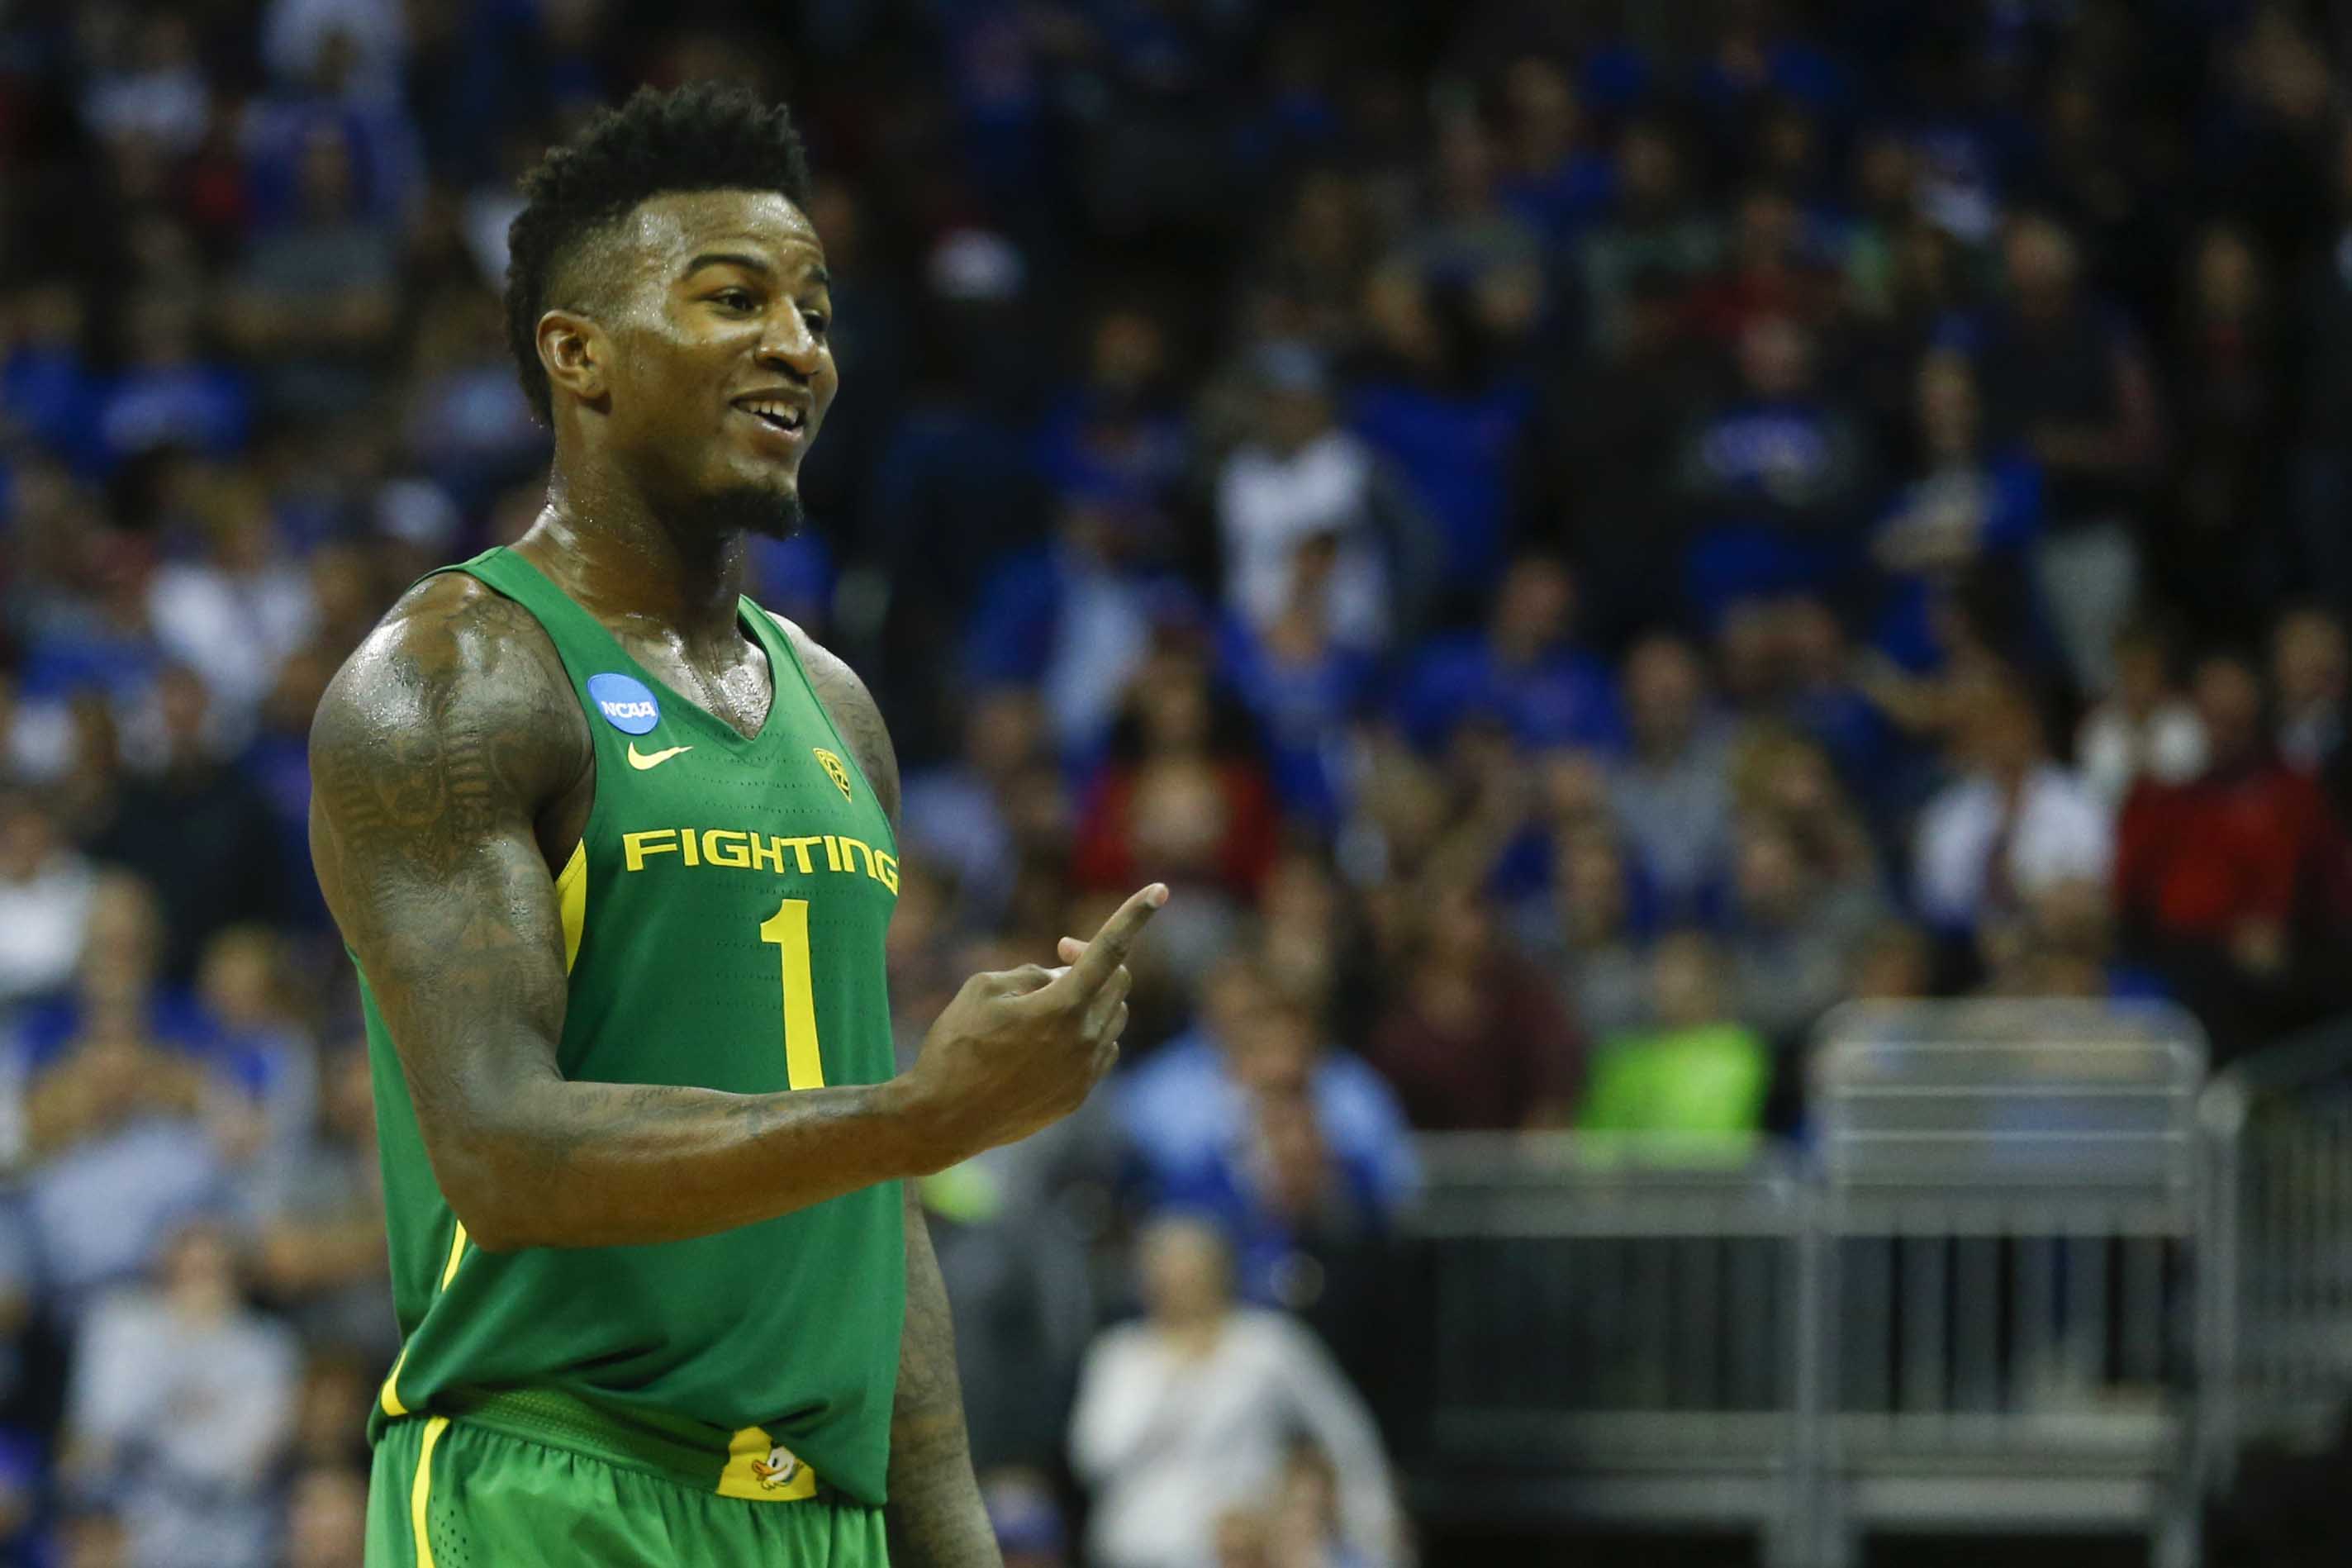 Jordan Bell is the anchor that could deliver Oregon a national championship